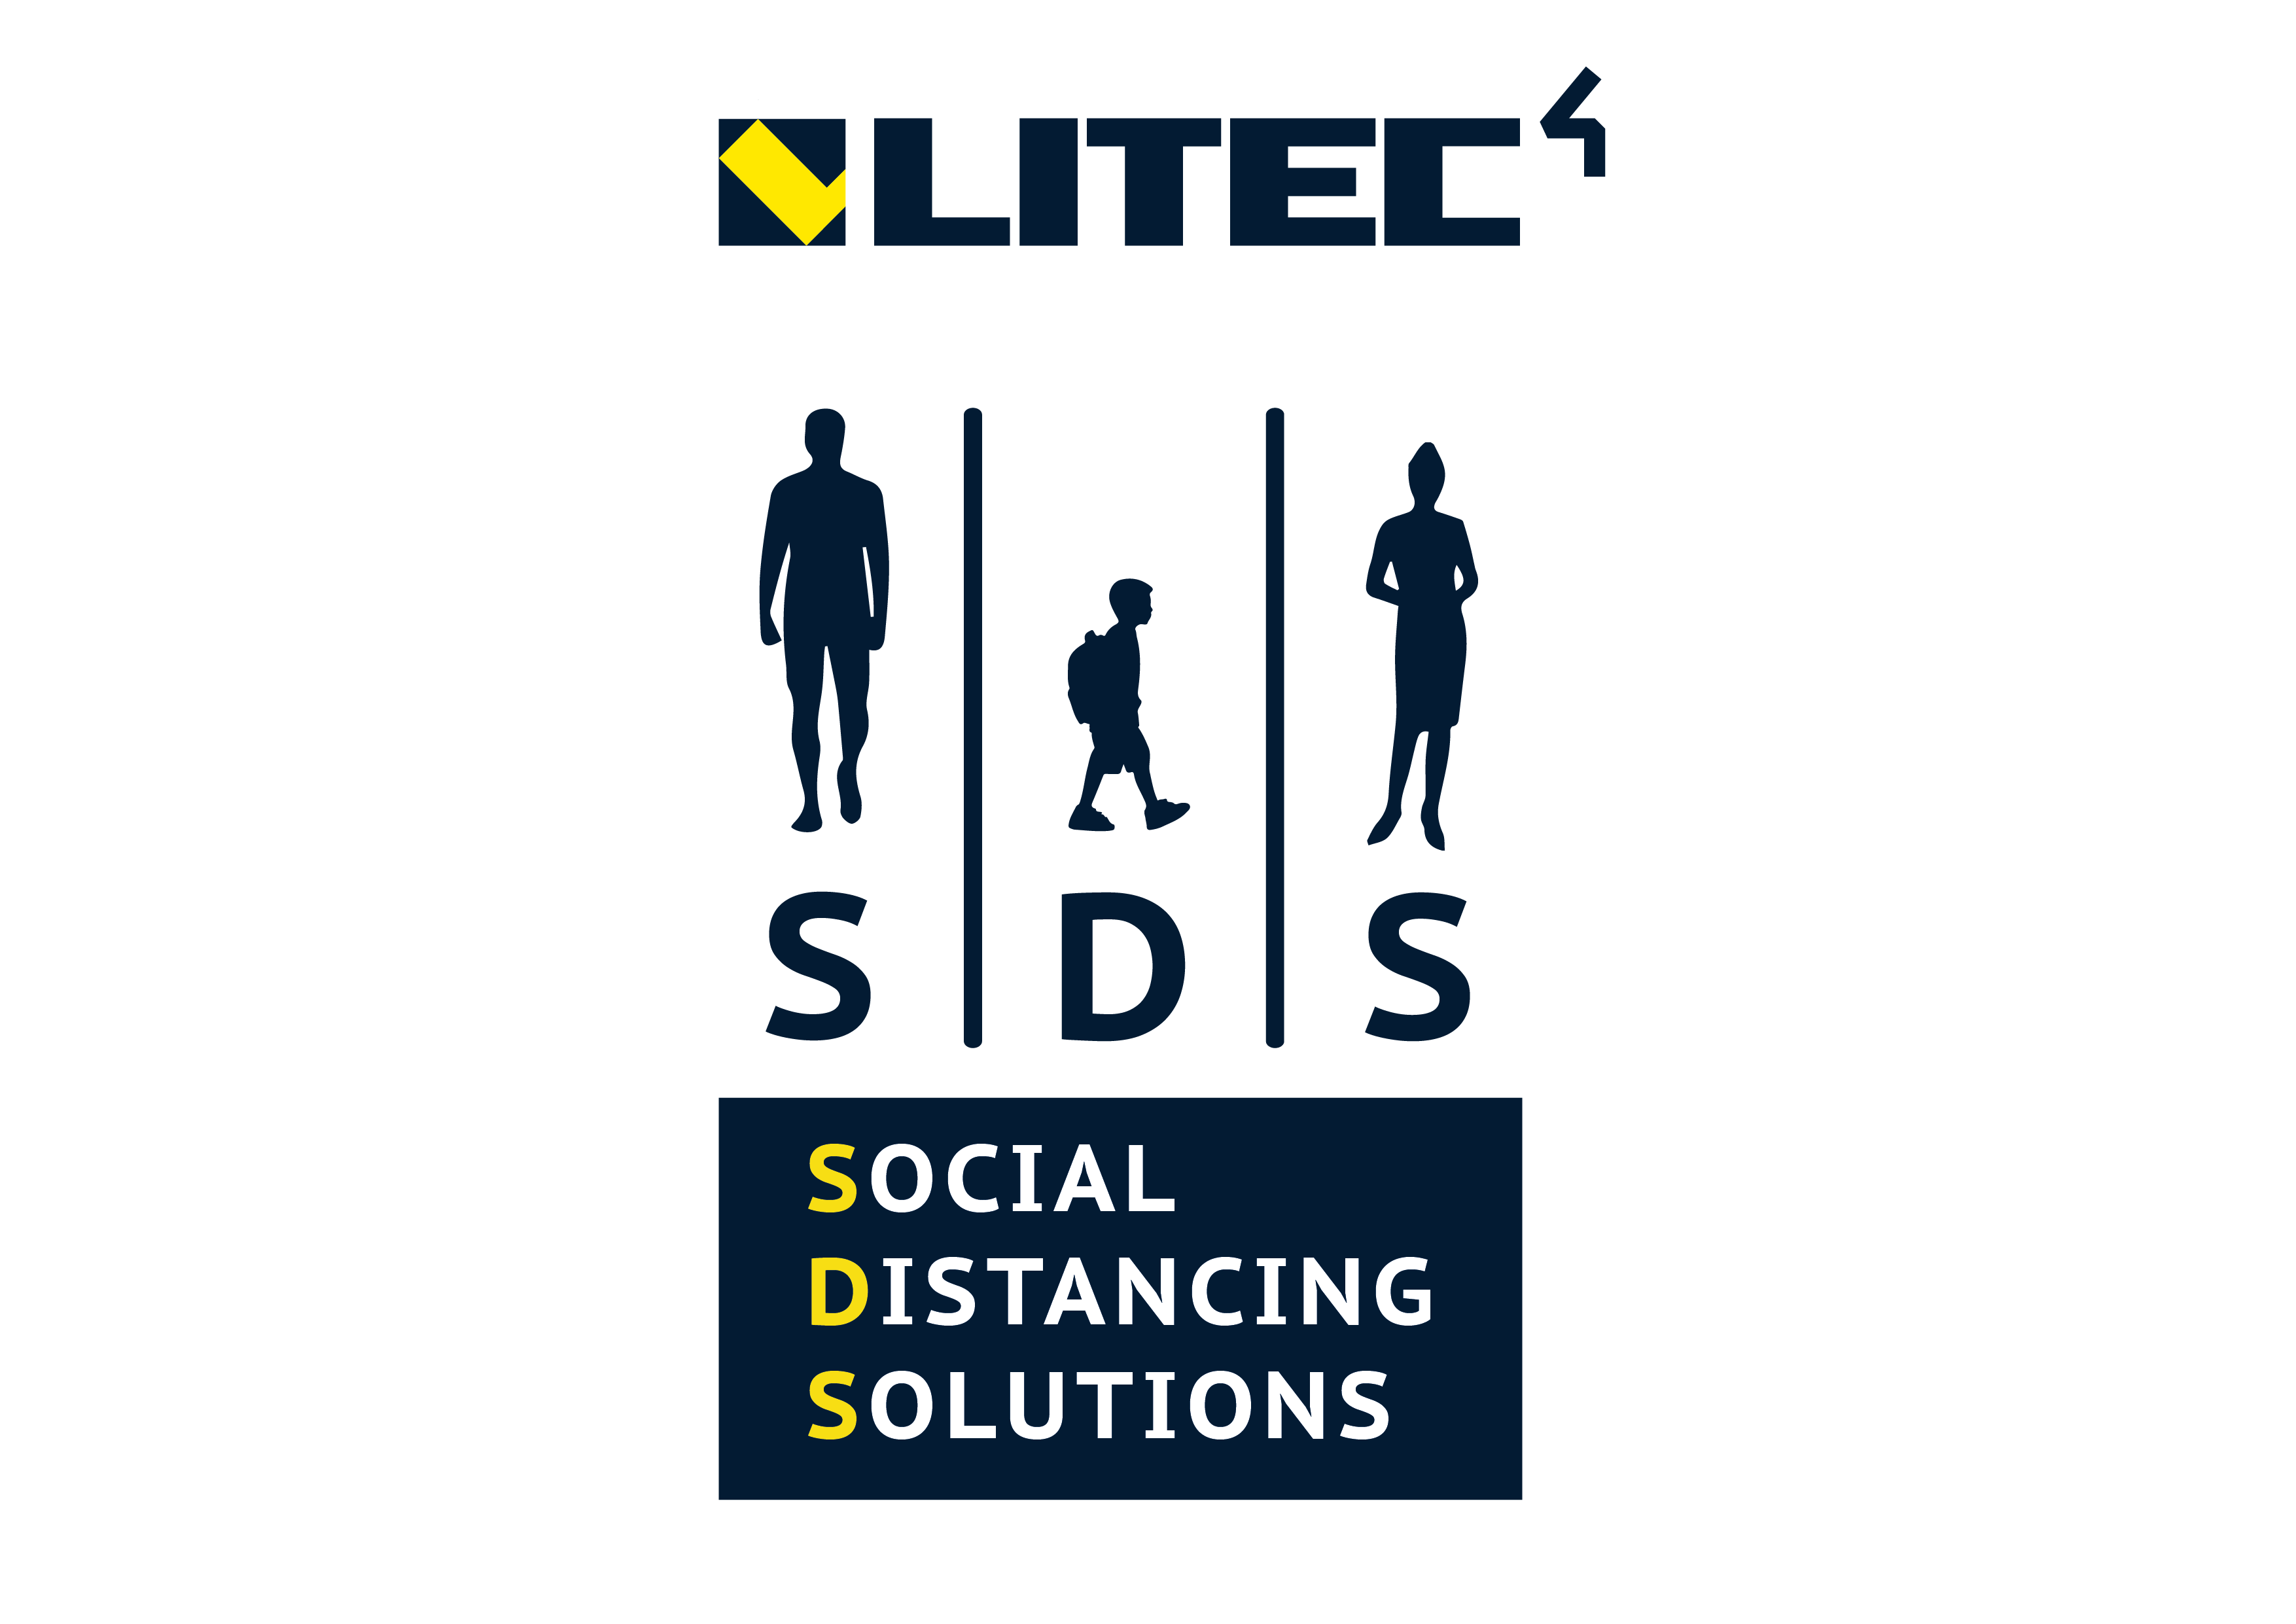 SDS Social Distancing Solutions